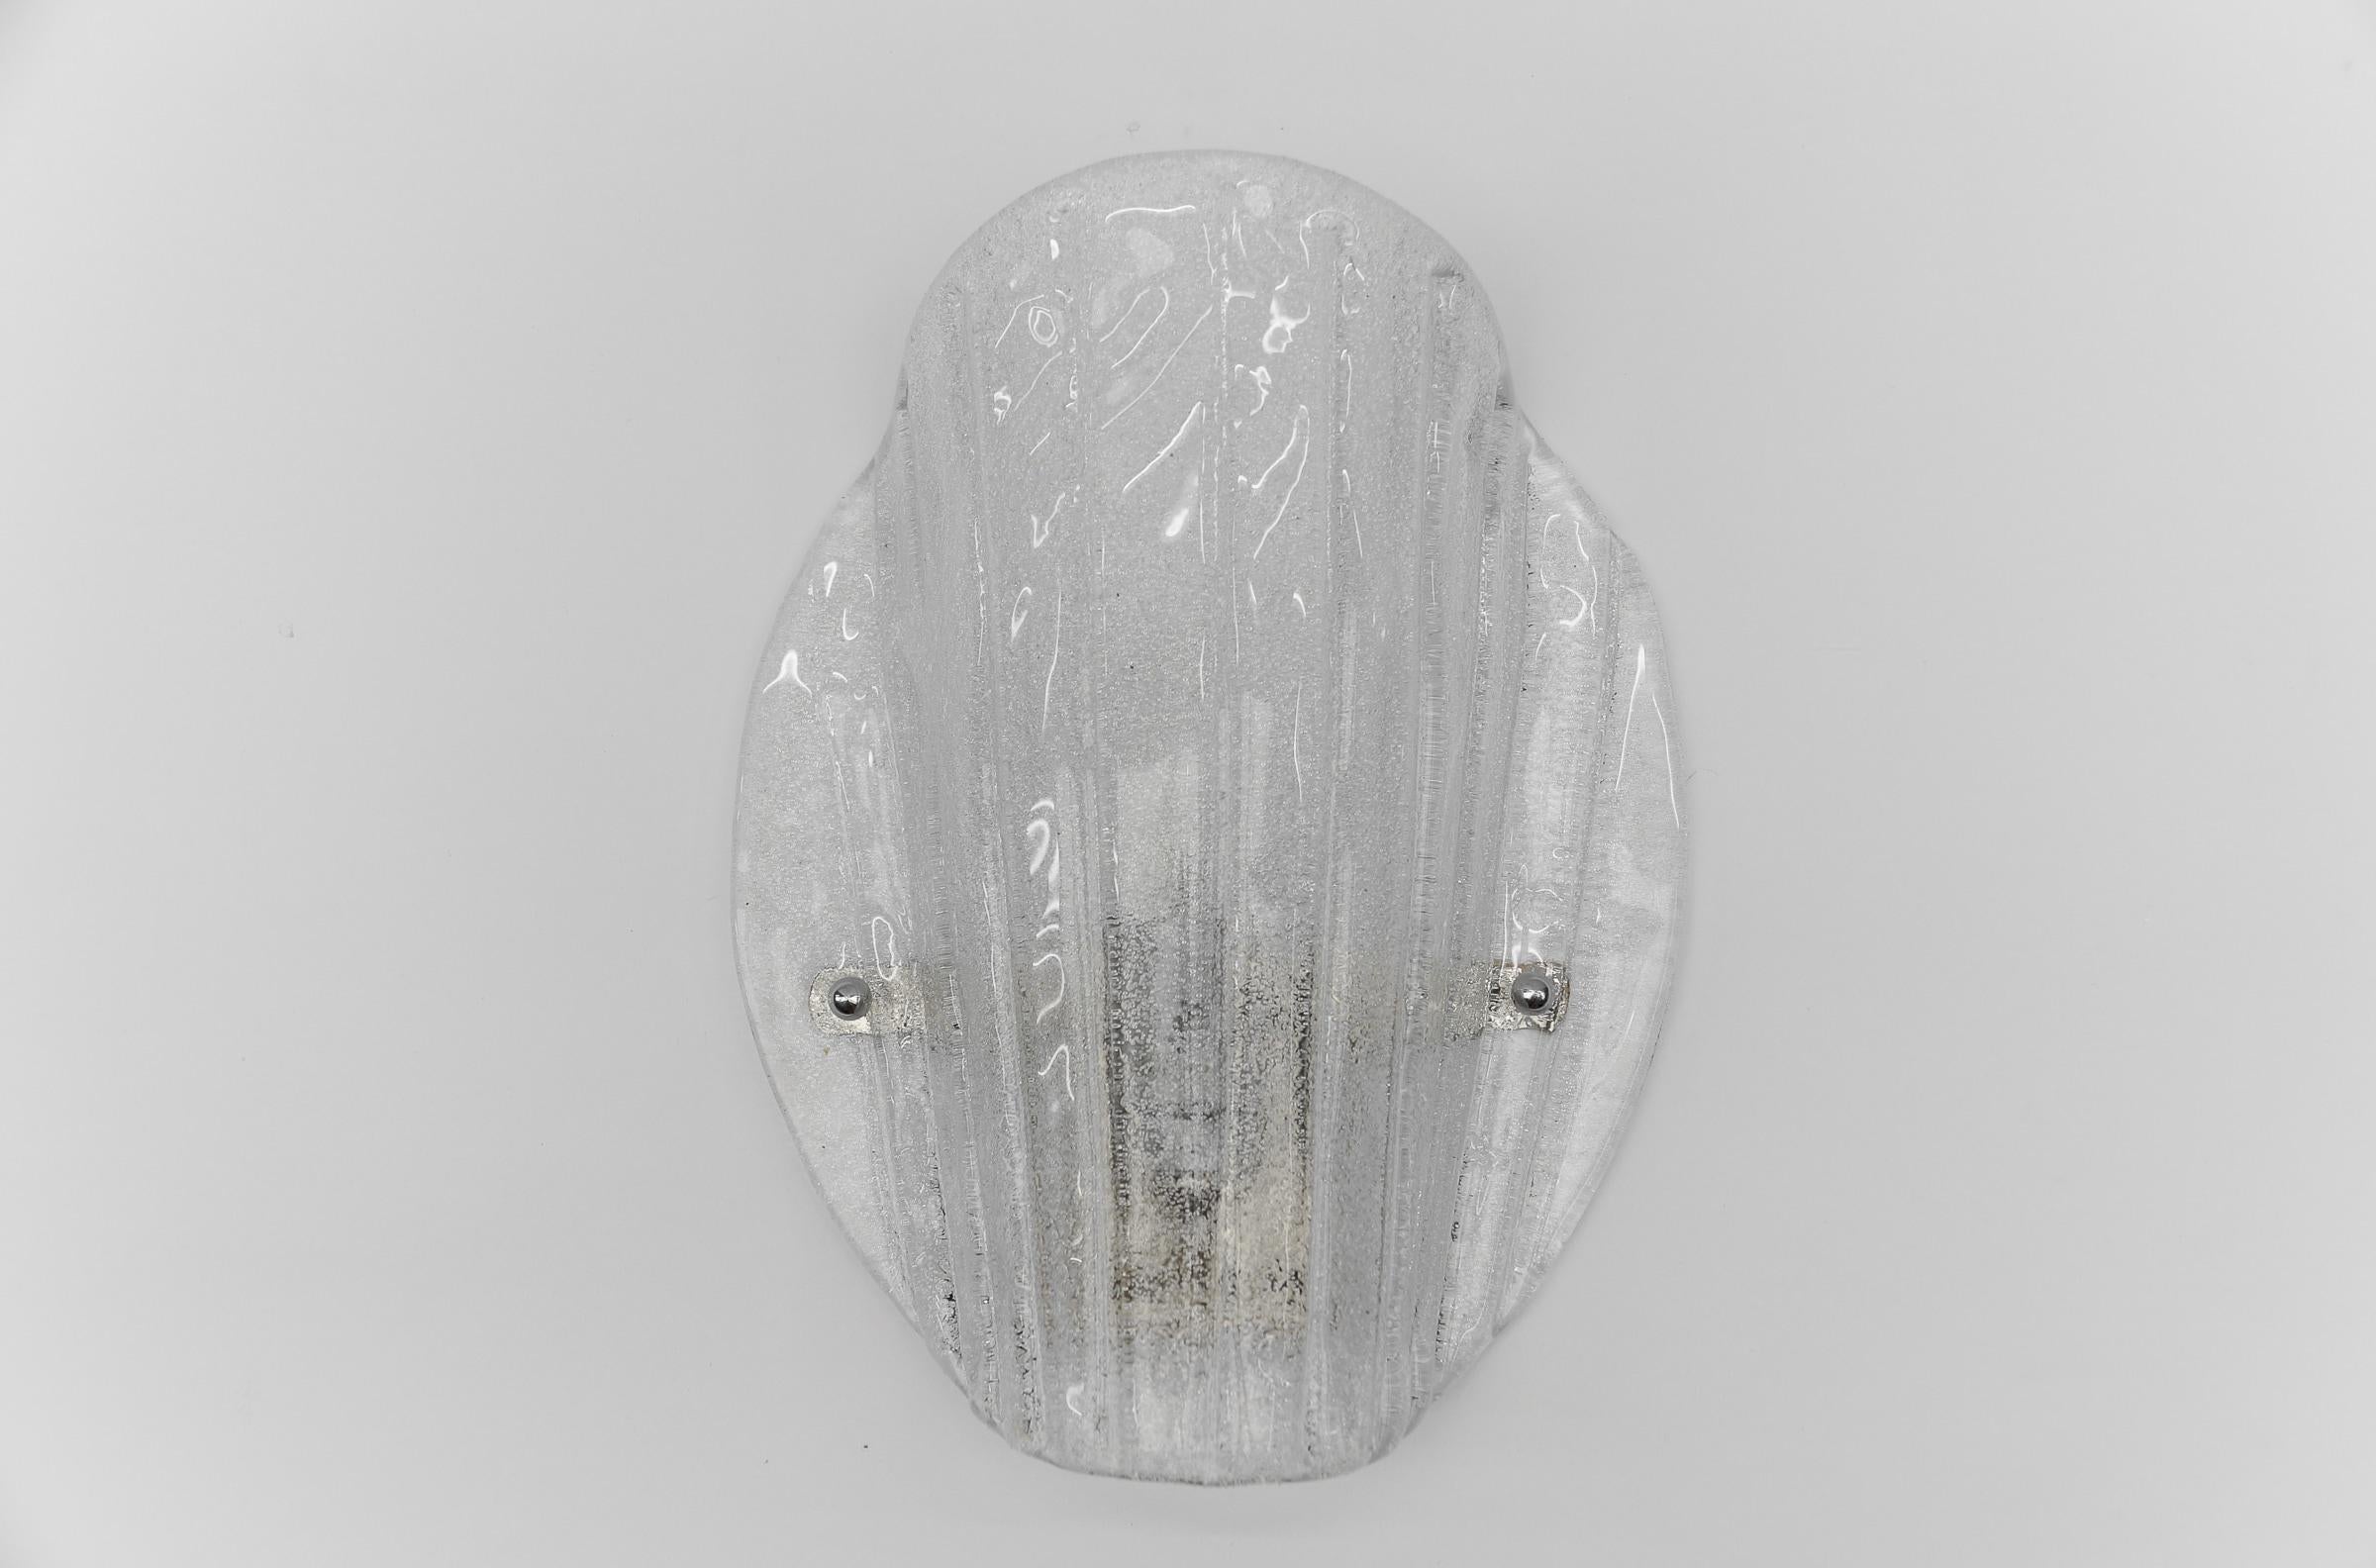 1 of 3 Murano Glass Sconce  Wall Lamp, 1960s

The wall lamp come with 1 x E14 / E15 Edison screw fit bulb holder, is wired and in working condition. It runs both on 110/230 Volt. Delivery without bulb.

Our lamps are checked, cleaned and are